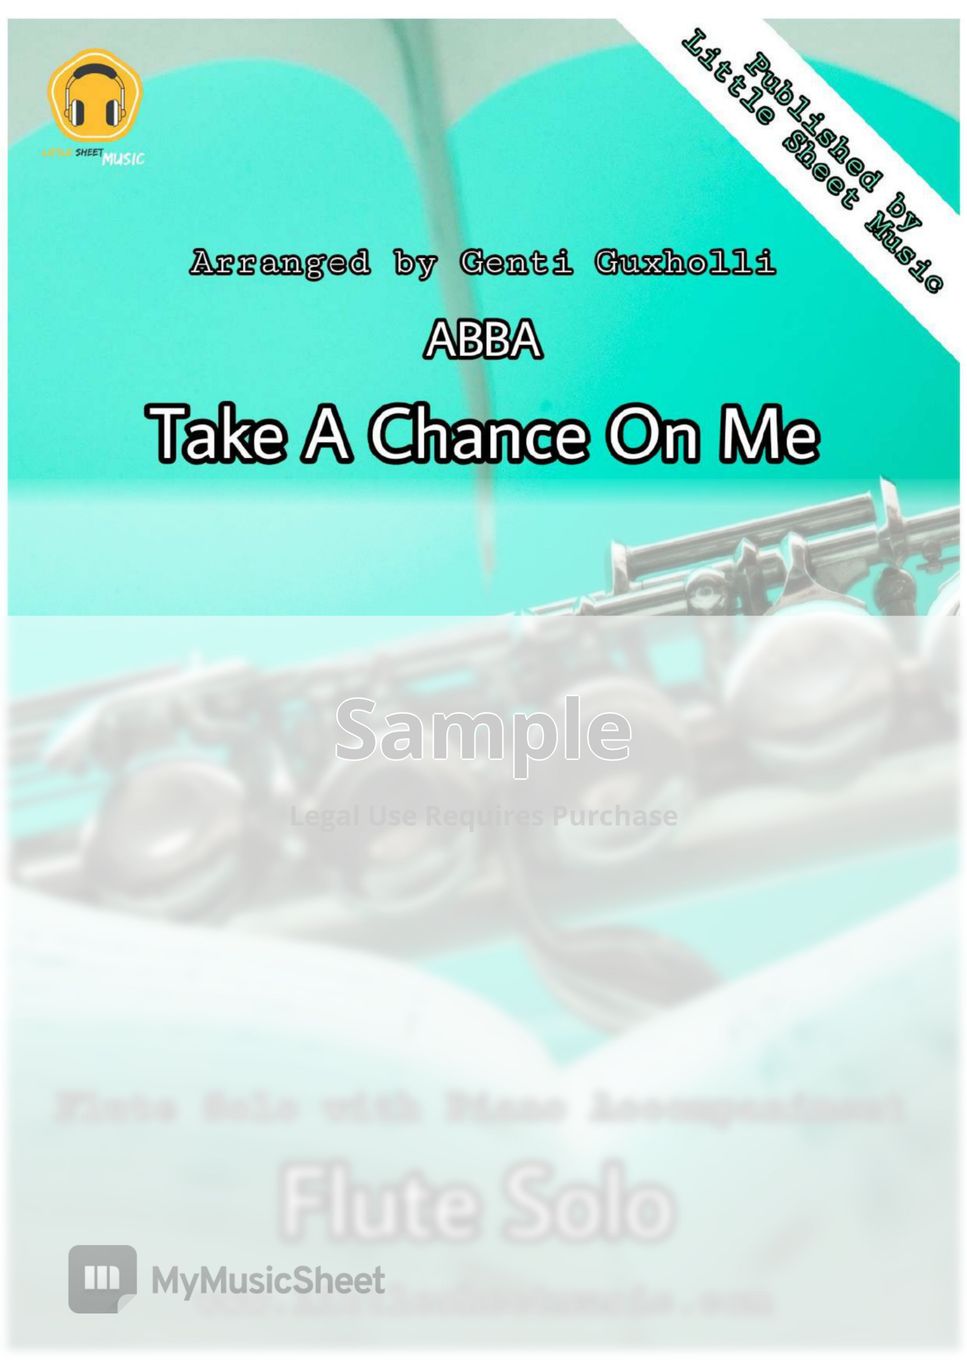 ABBA - Take A Chance On Me (Flute Solo with Piano Accompaniment) by Genti Guxholli